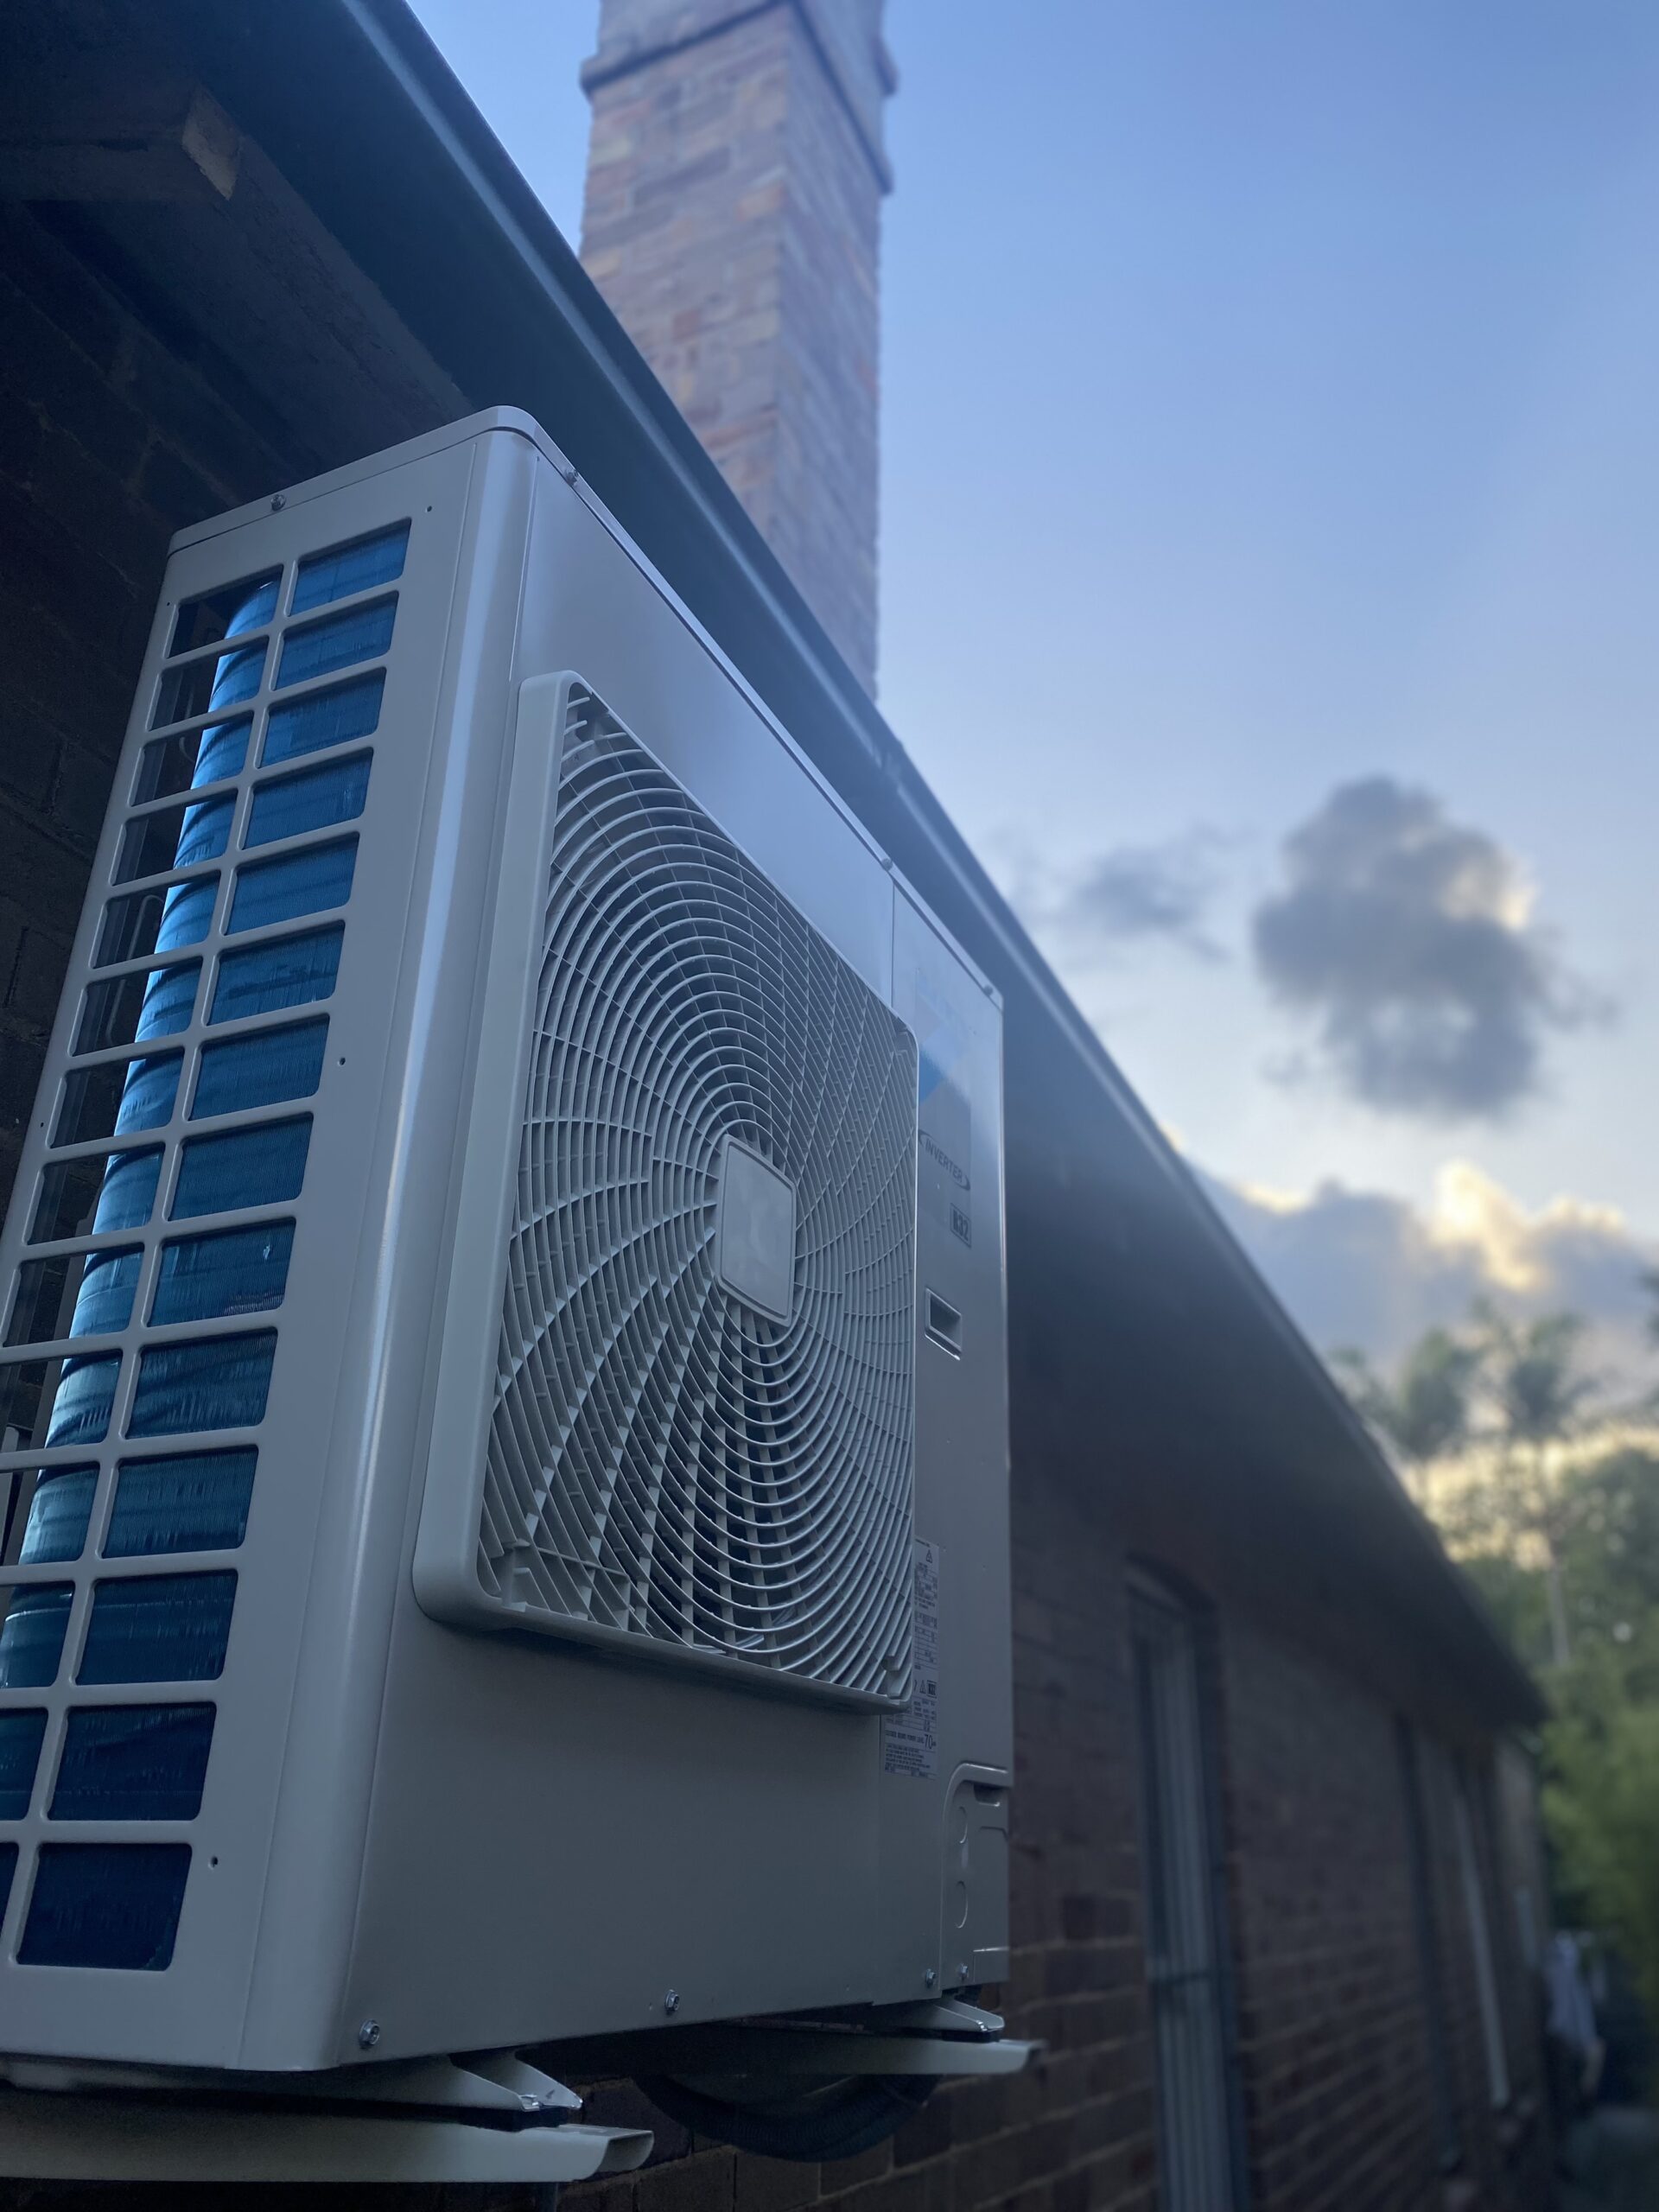 Project – Daikin ducted system installation at Mosman.